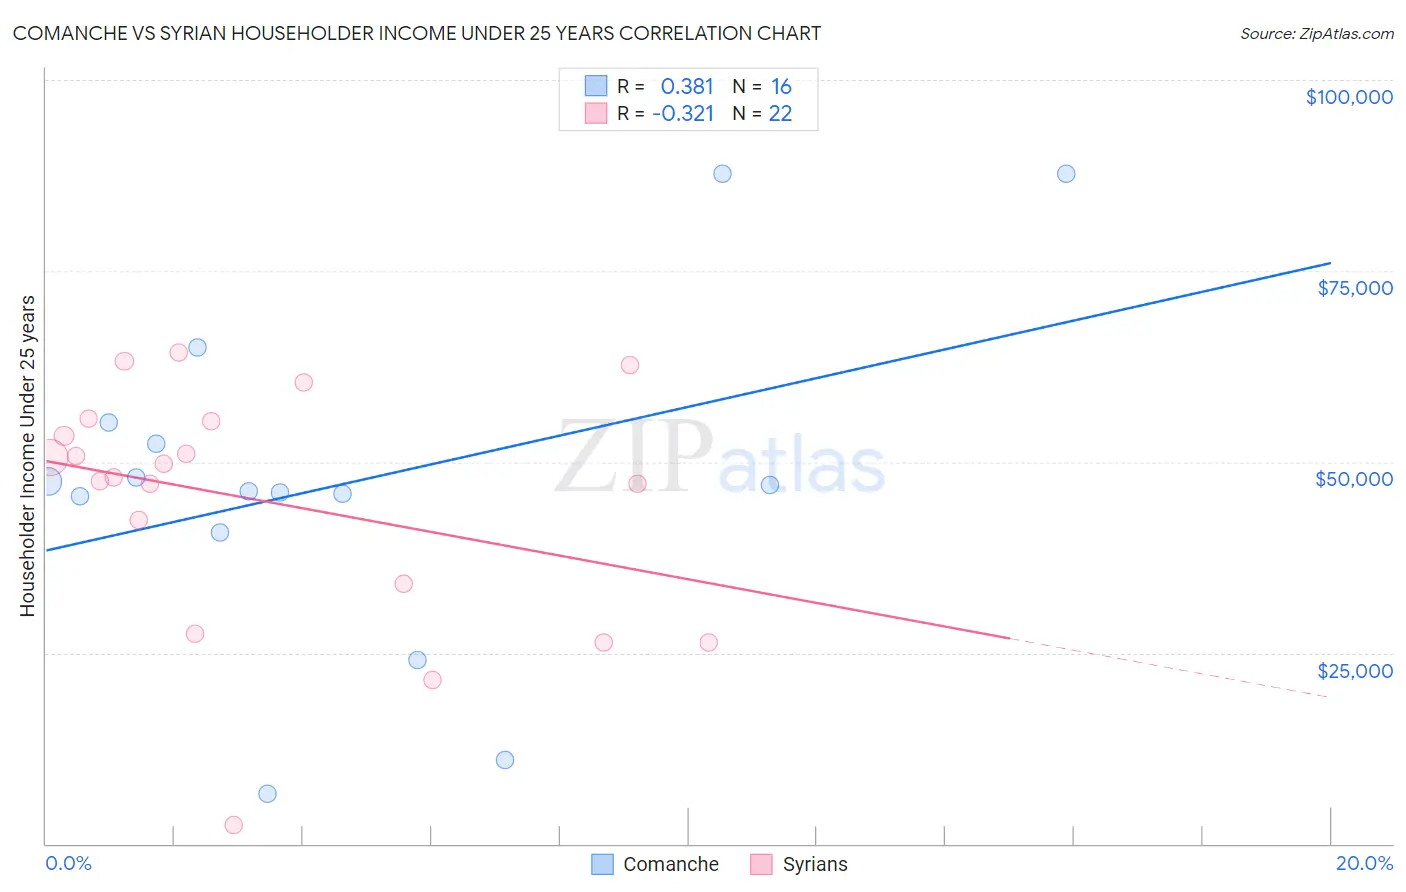 Comanche vs Syrian Householder Income Under 25 years